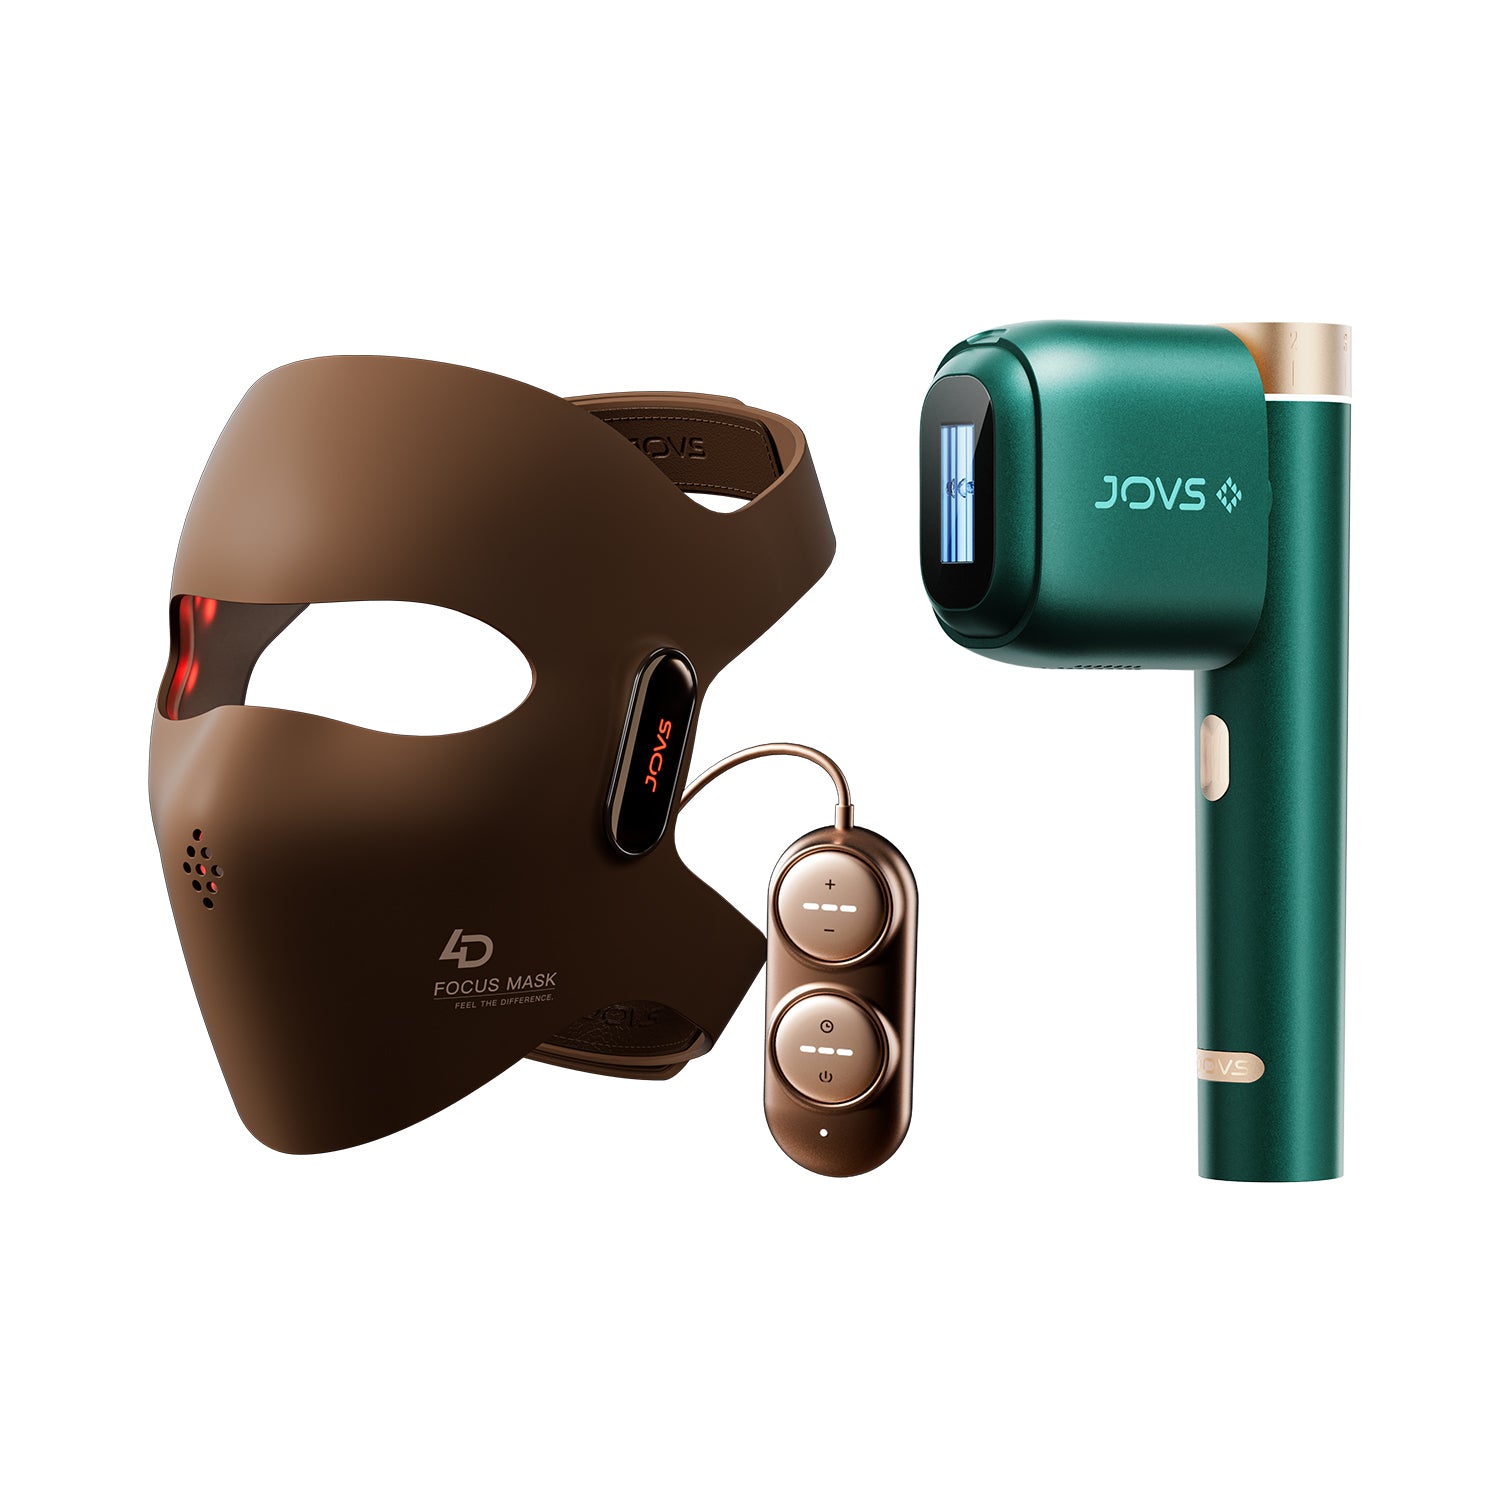 JOVS 4D Laser Mask paired with JOVS Venus Pro II IPL Hair Removal Device, offering a comprehensive beauty and skincare solution.